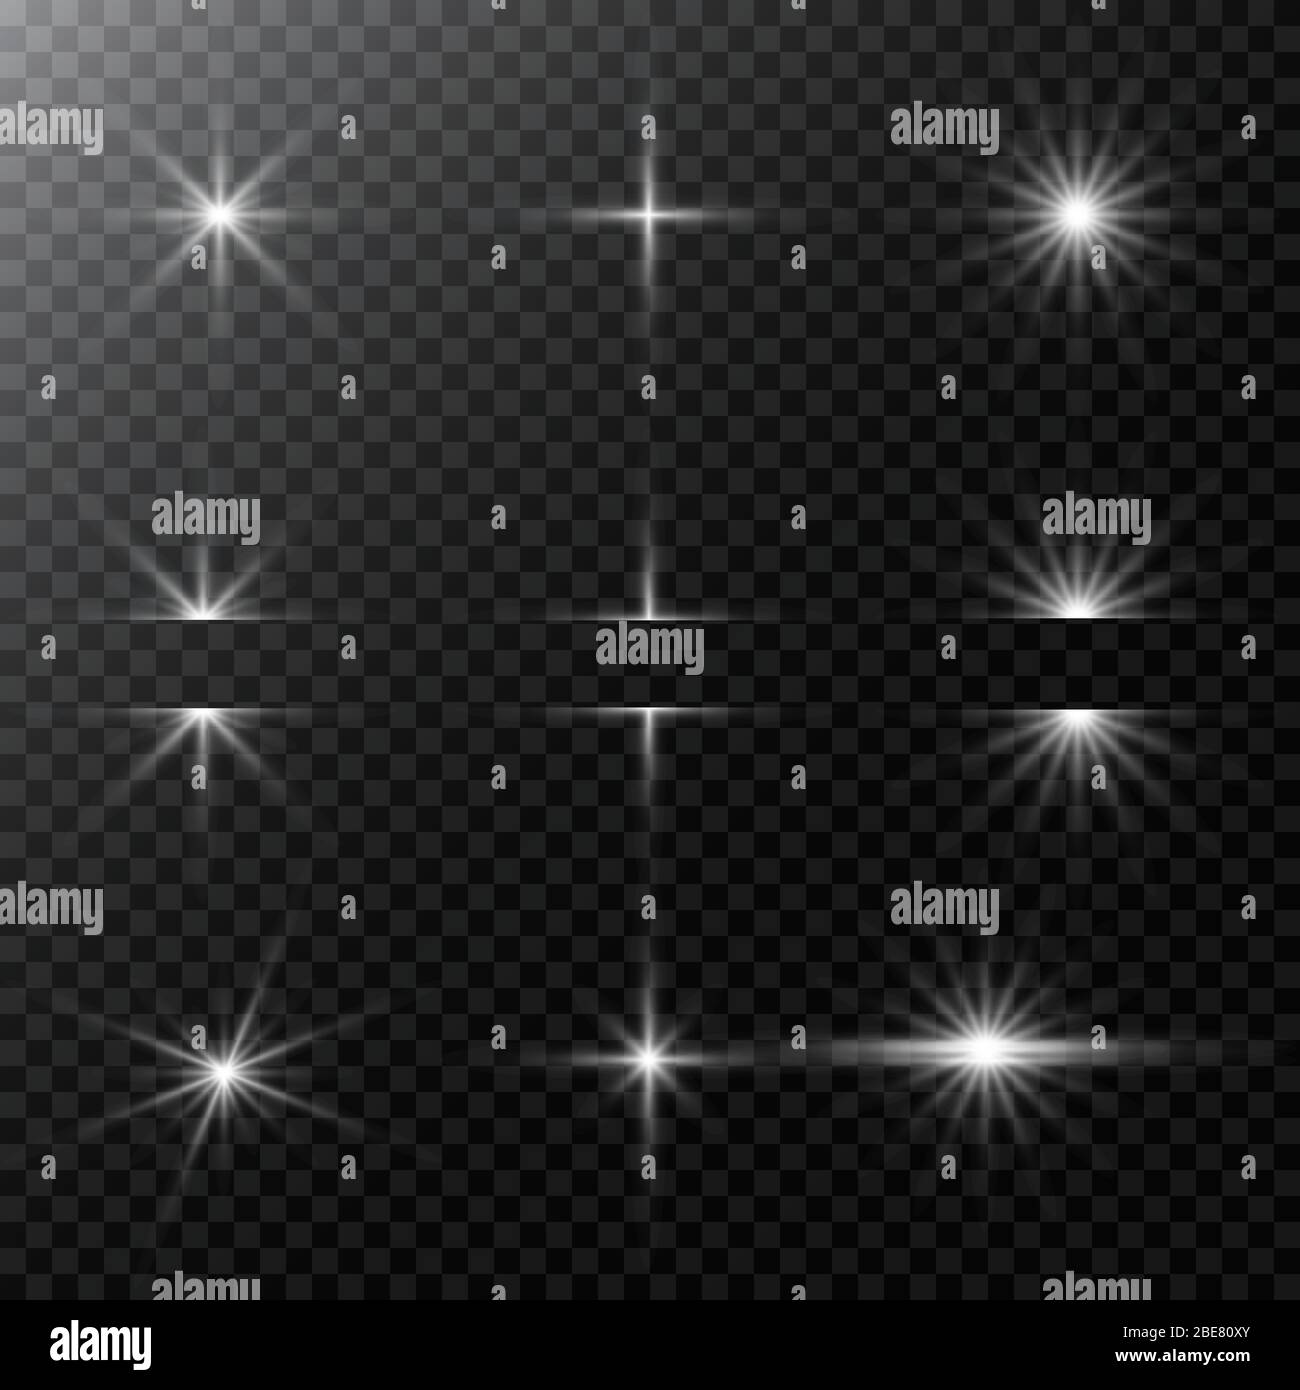 Set of Vector glowing light effect stars bursts with sparkles and flare, explosion on transparent background. Stock - Vector illustration. Stock Vector